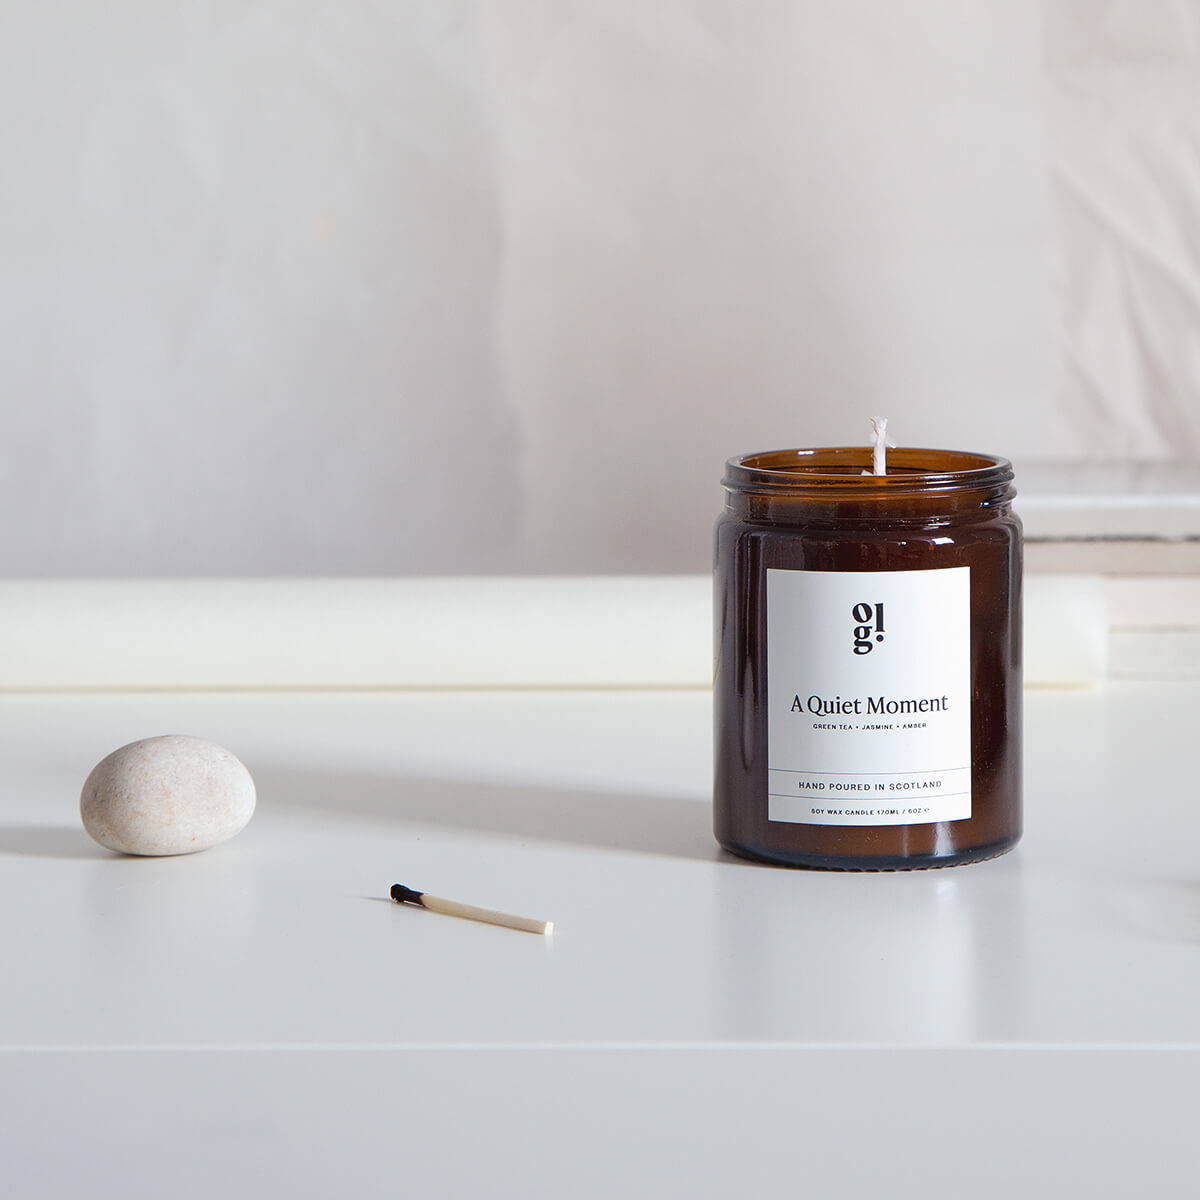 A Quiet Moment Scented Candle by Our Lovely Goods